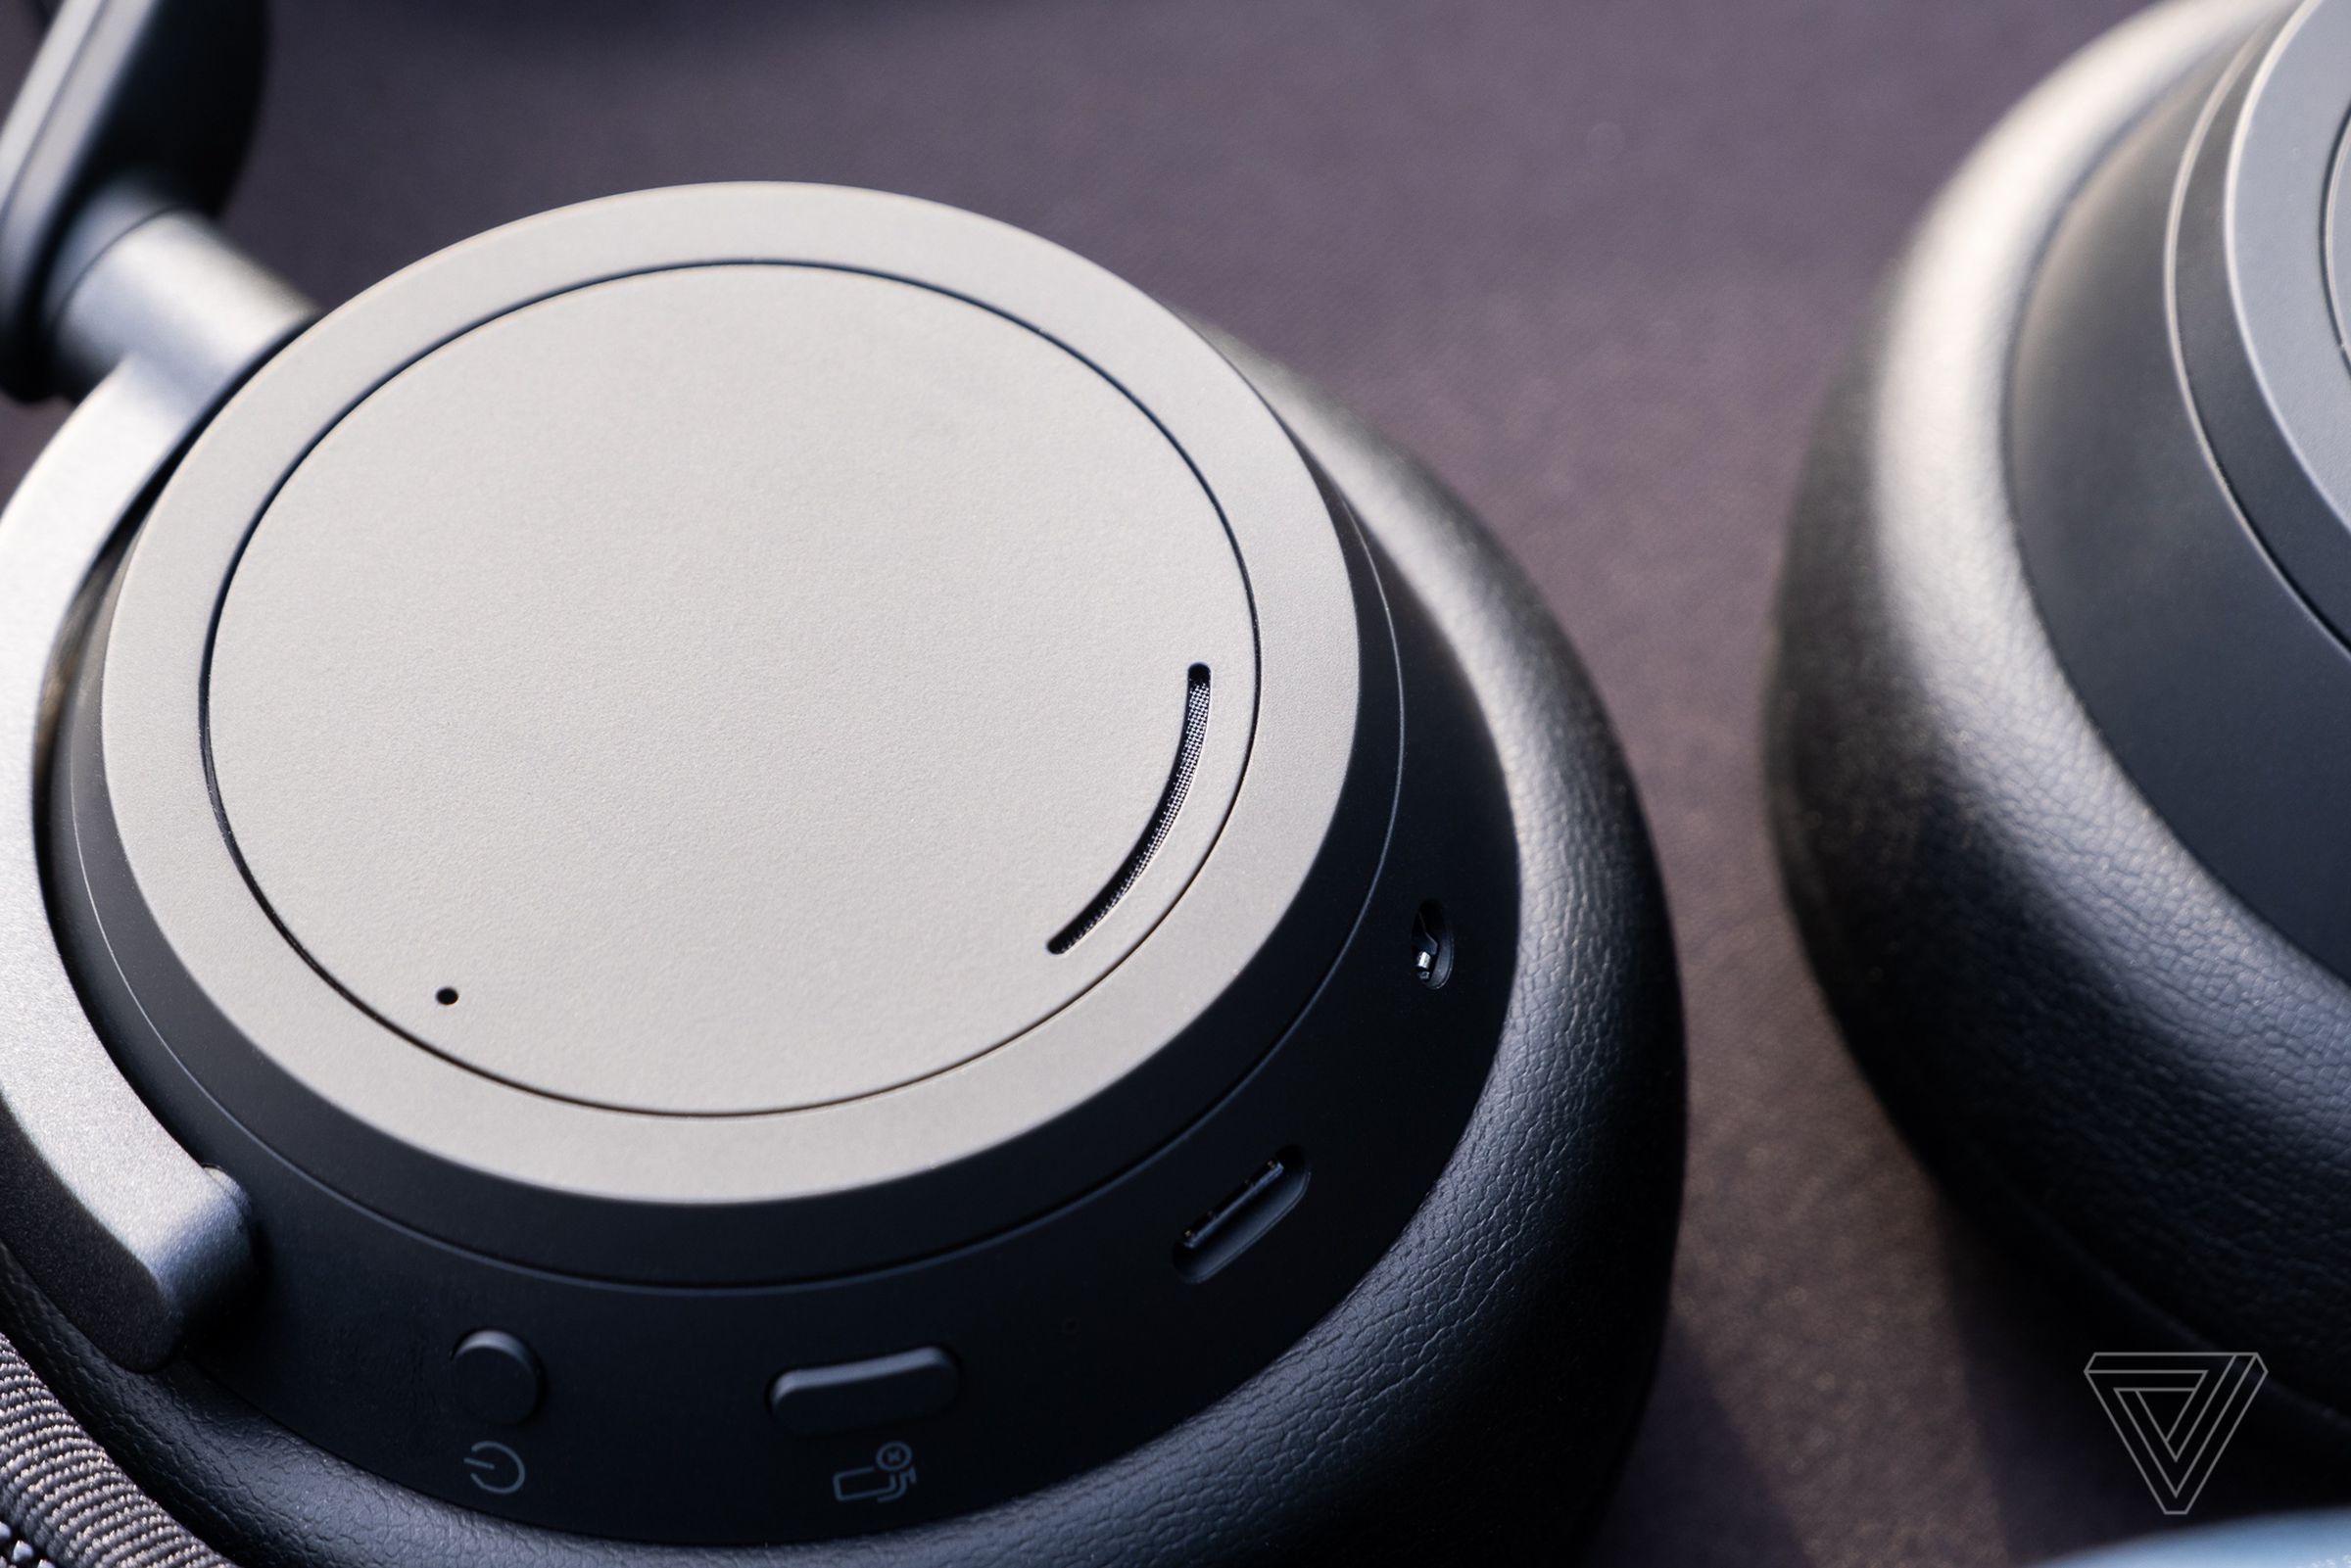 An image of the outer earcup on the Surface Headphones 2.